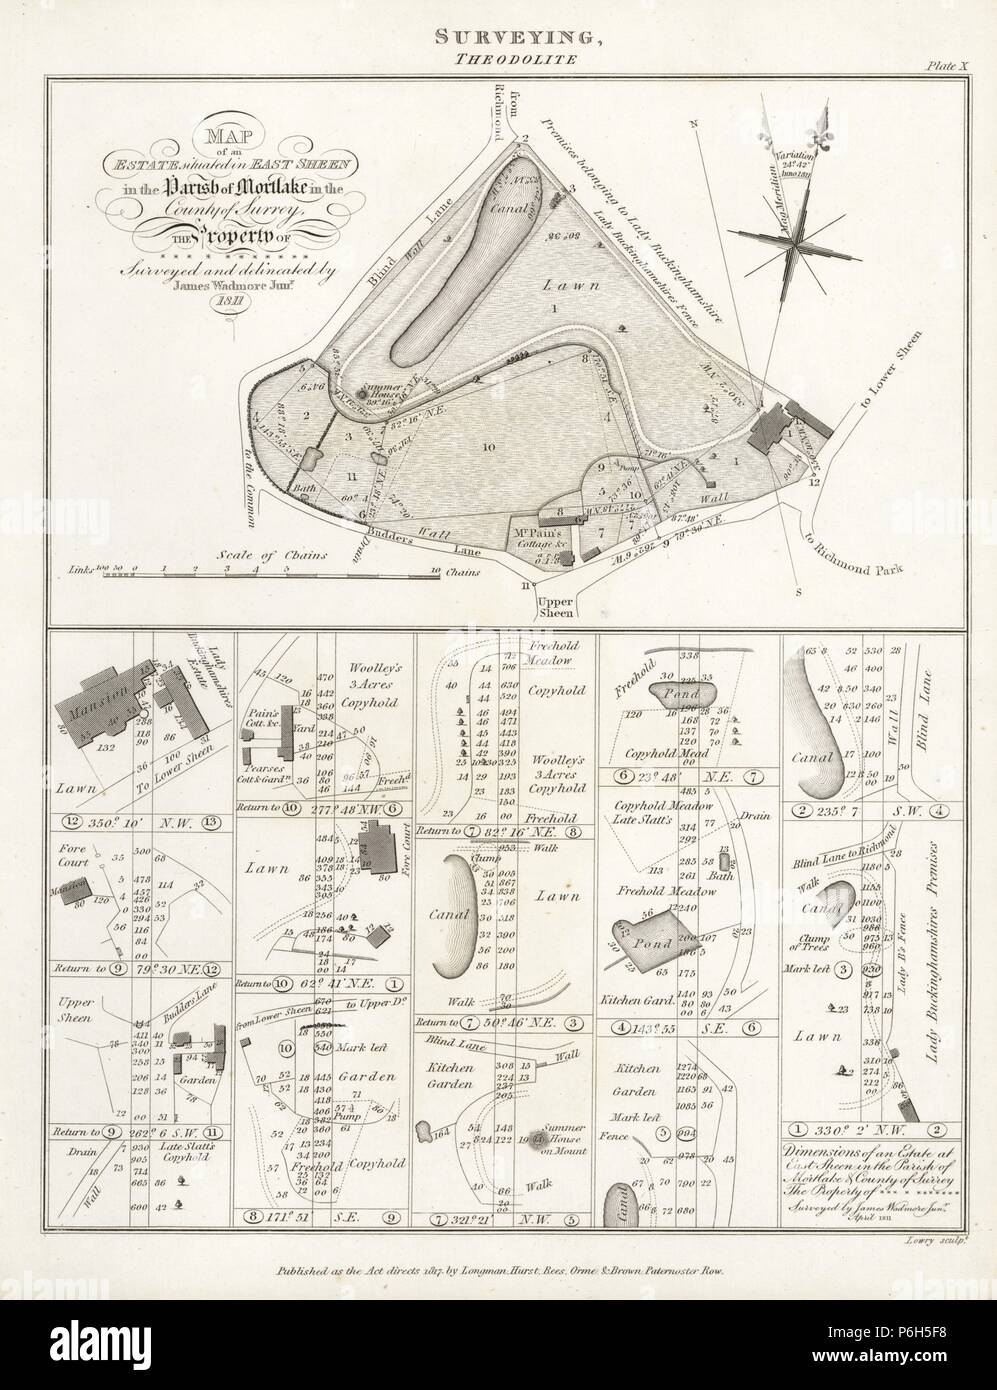 Map of an estate in East Sheen, Surrey, surveyed and delineated using a theodolite by James Wadmore, 1811. Copperplate engraving by W. Lowry after an Illustration from Abraham Rees' 'Cyclopedia or Universal Dictionary,' London, 1817. Stock Photo